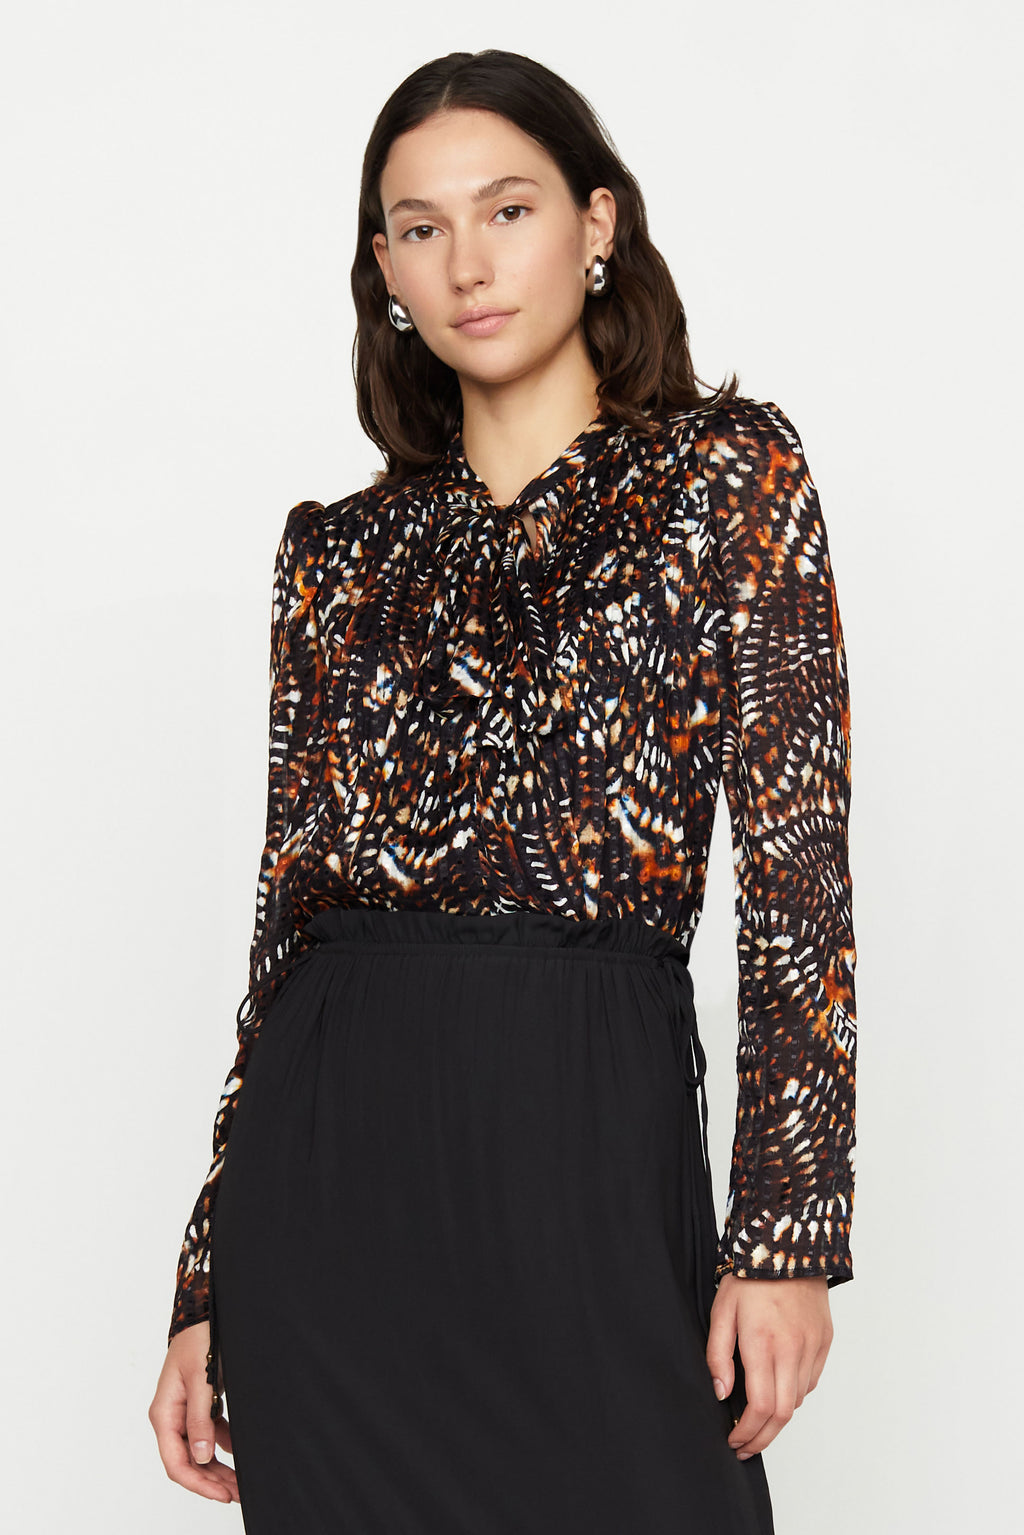 Patterned blouse with flowy long sleeves, tie neck options as bow or knotted 